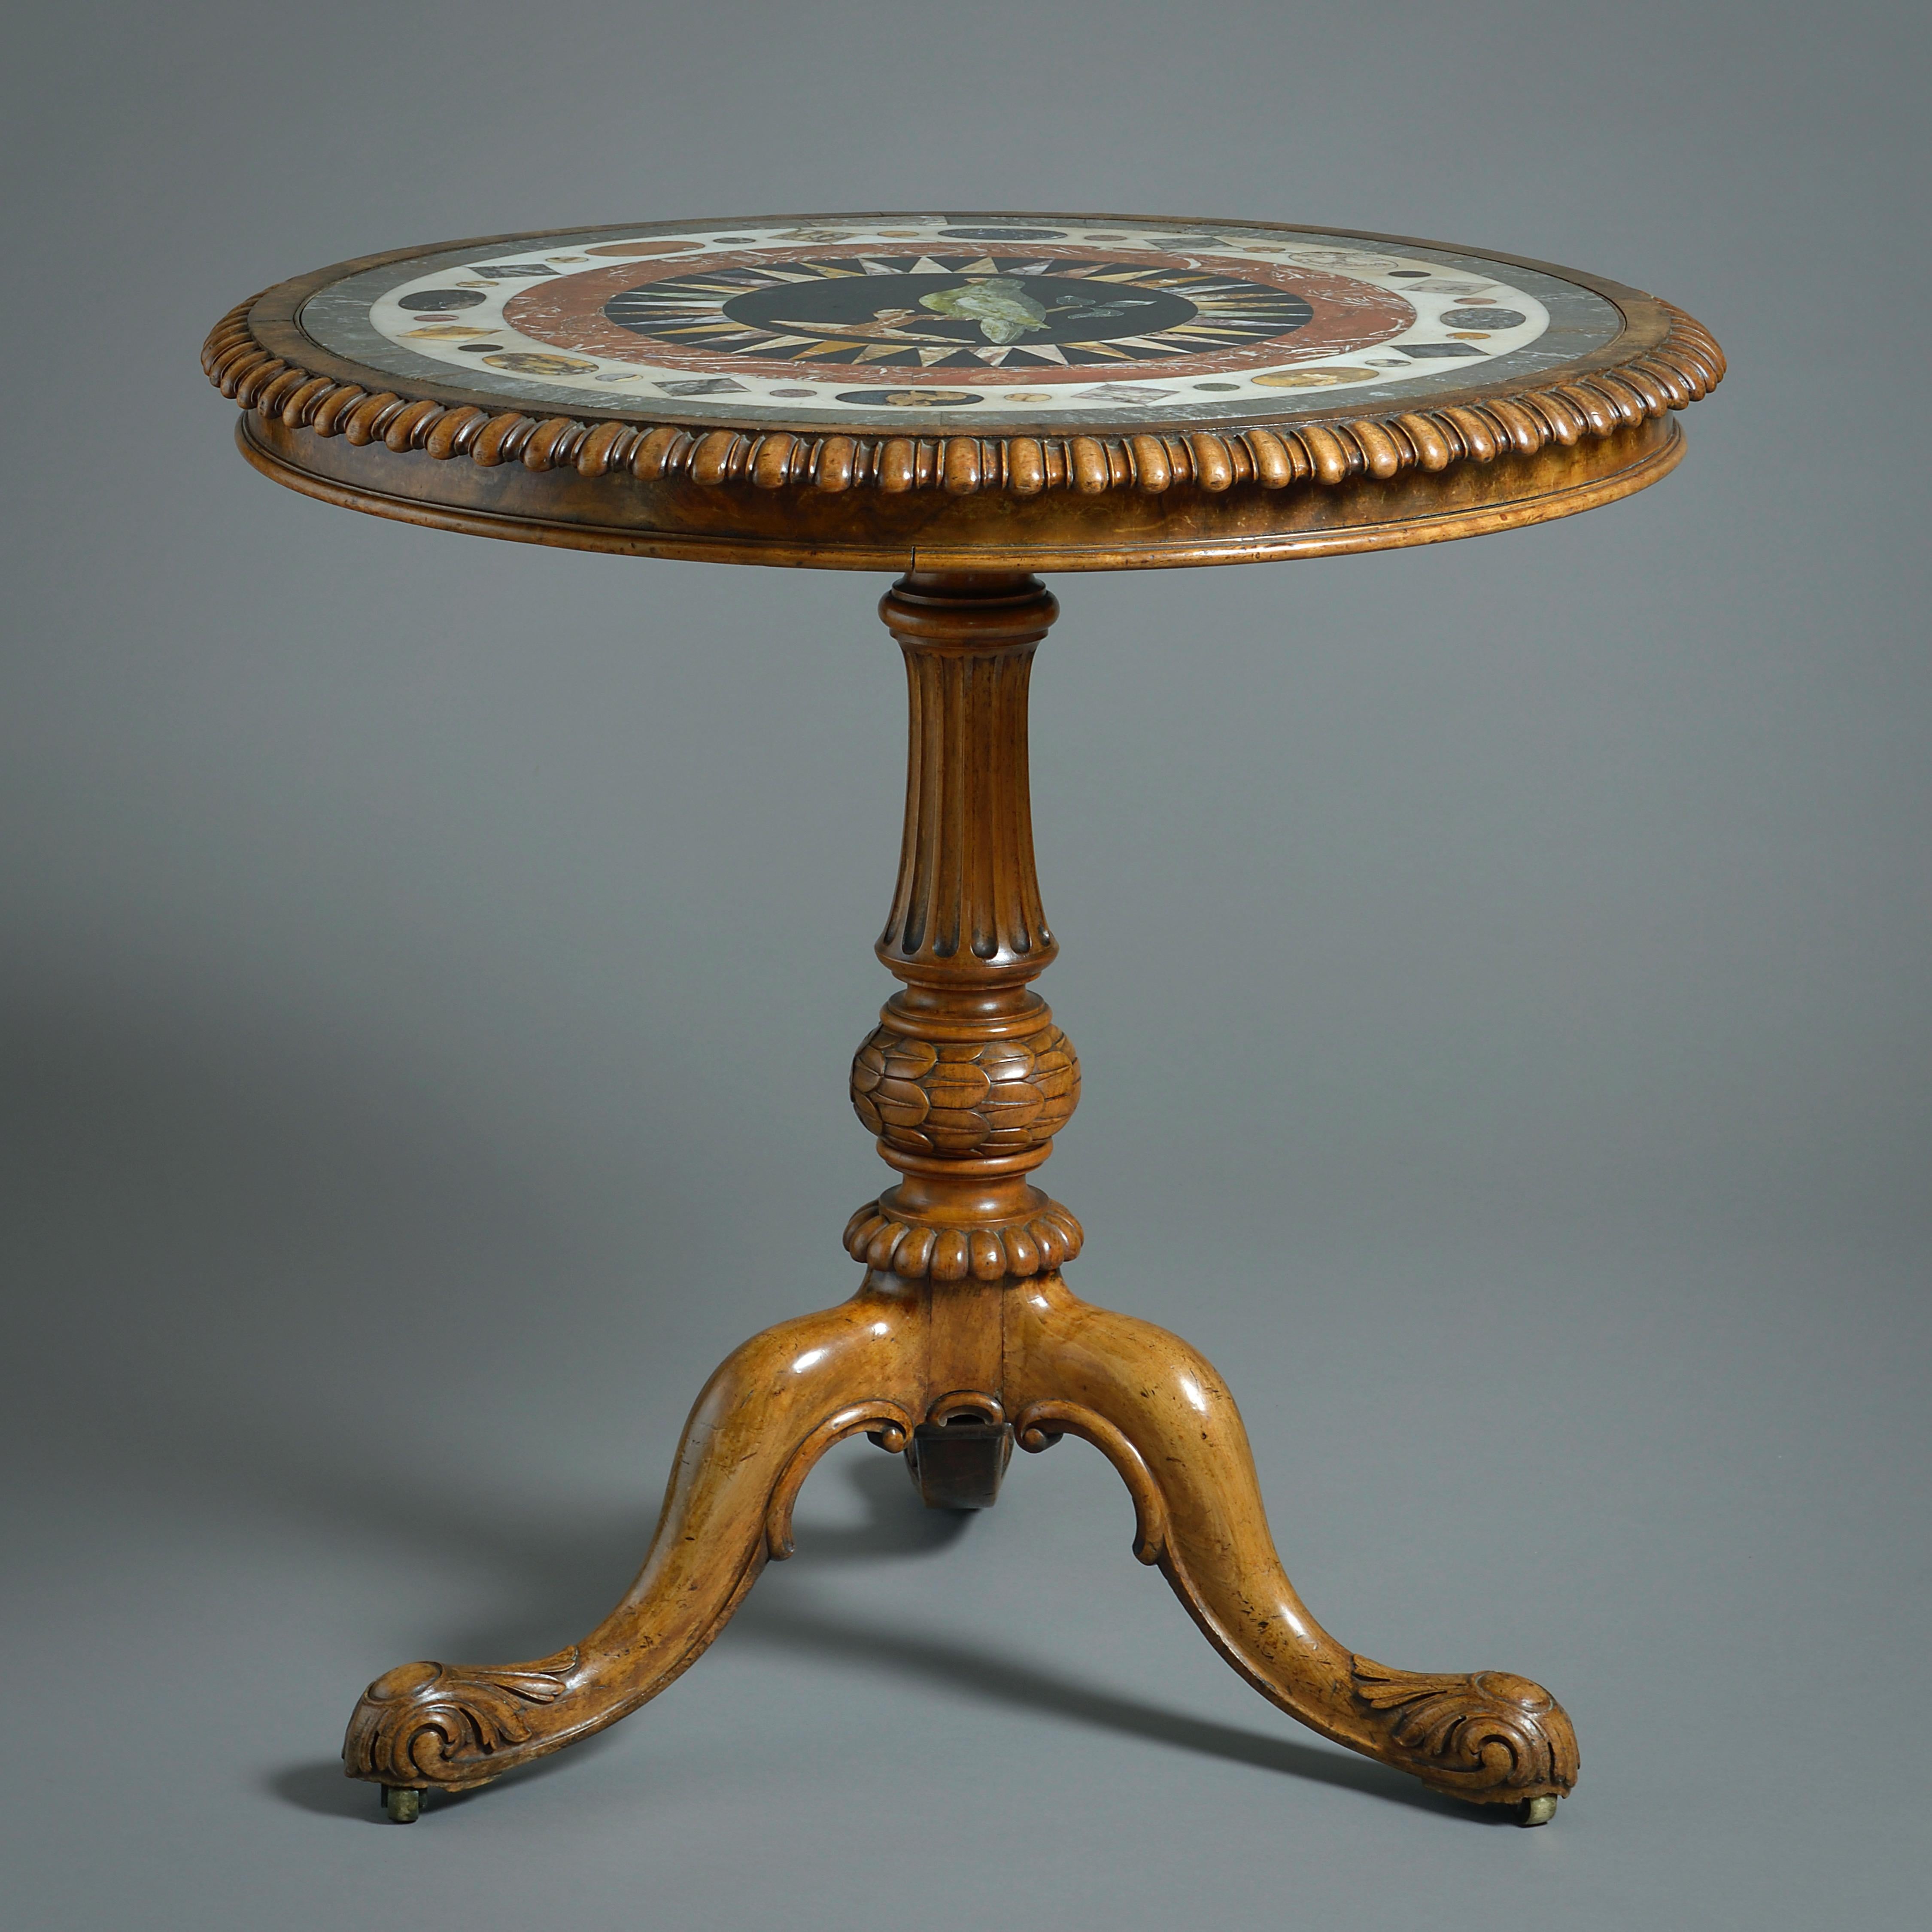 A FINE WILLIAM IV PIETRA DURA AND WALNUT CENTRE TABLE ATTRIBUTED TO GILLOWS, CIRCA 1835.

The inset top geometrically inlaid with various marbles around a central roundel of a green parrot on a branch.